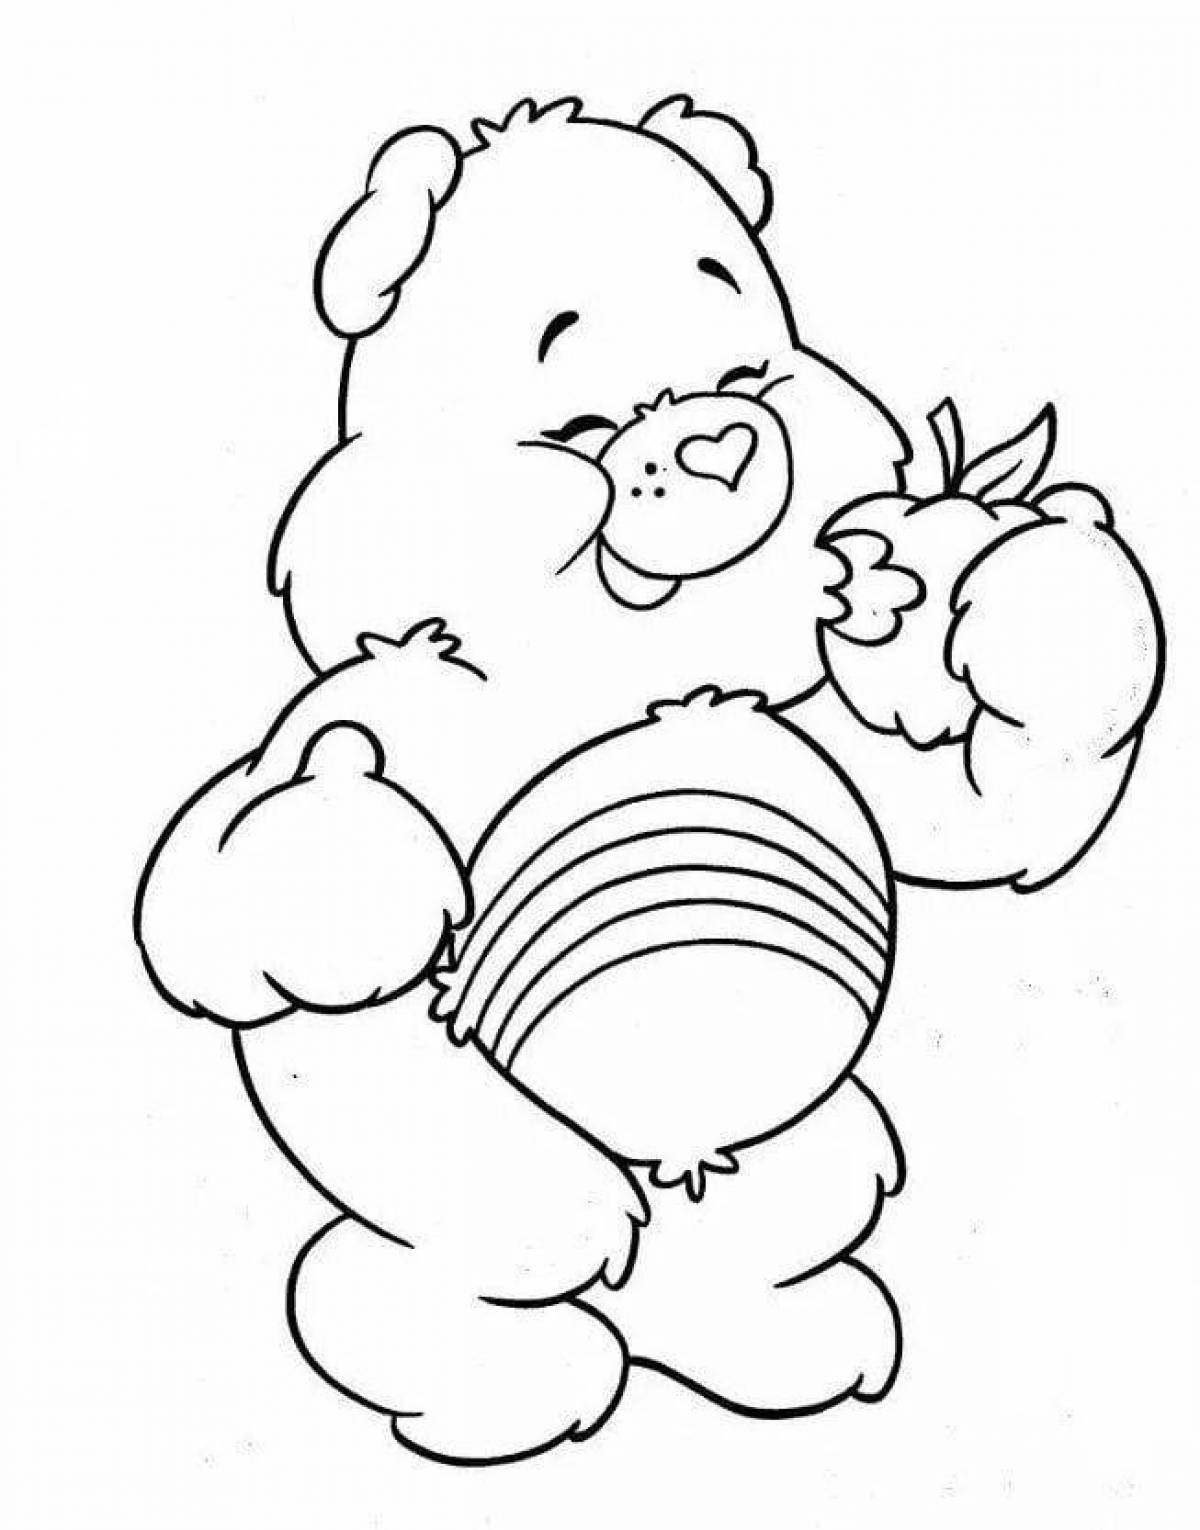 Glittering care bears coloring page